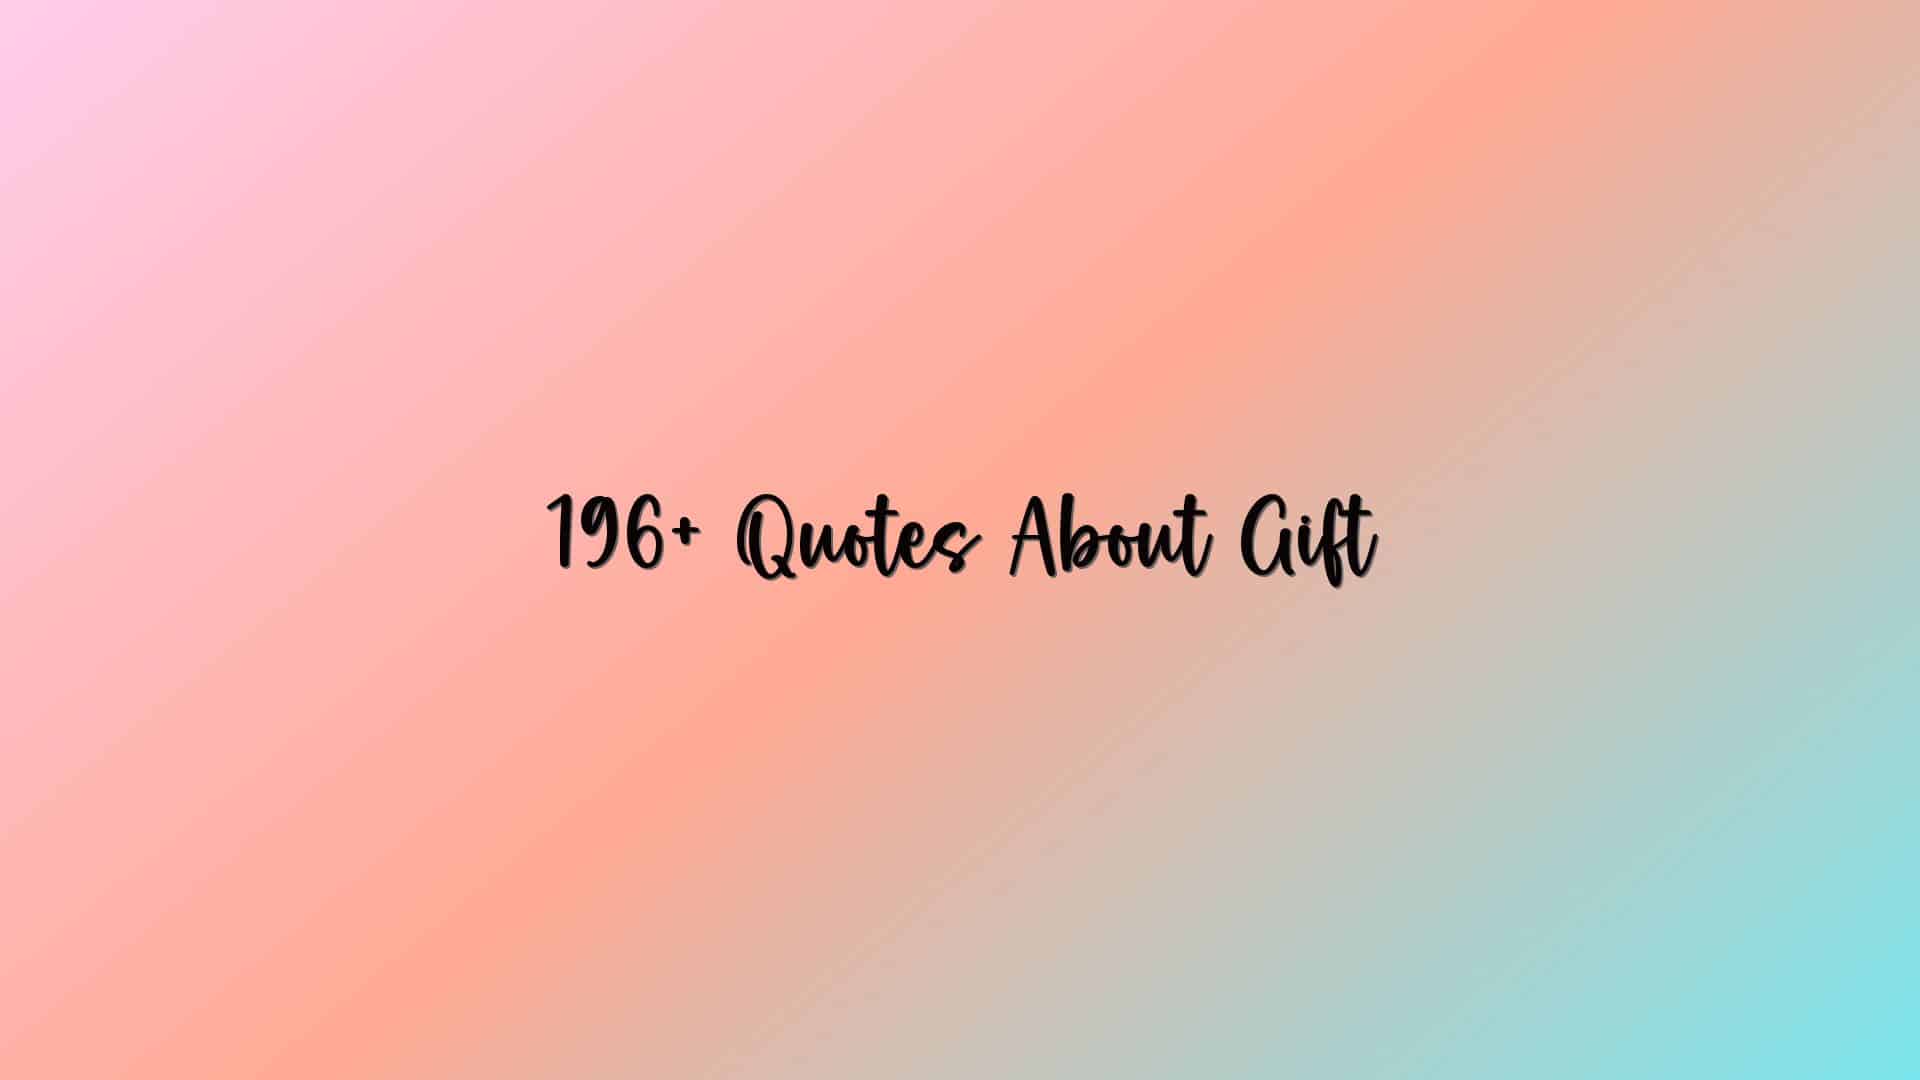 196+ Quotes About Gift